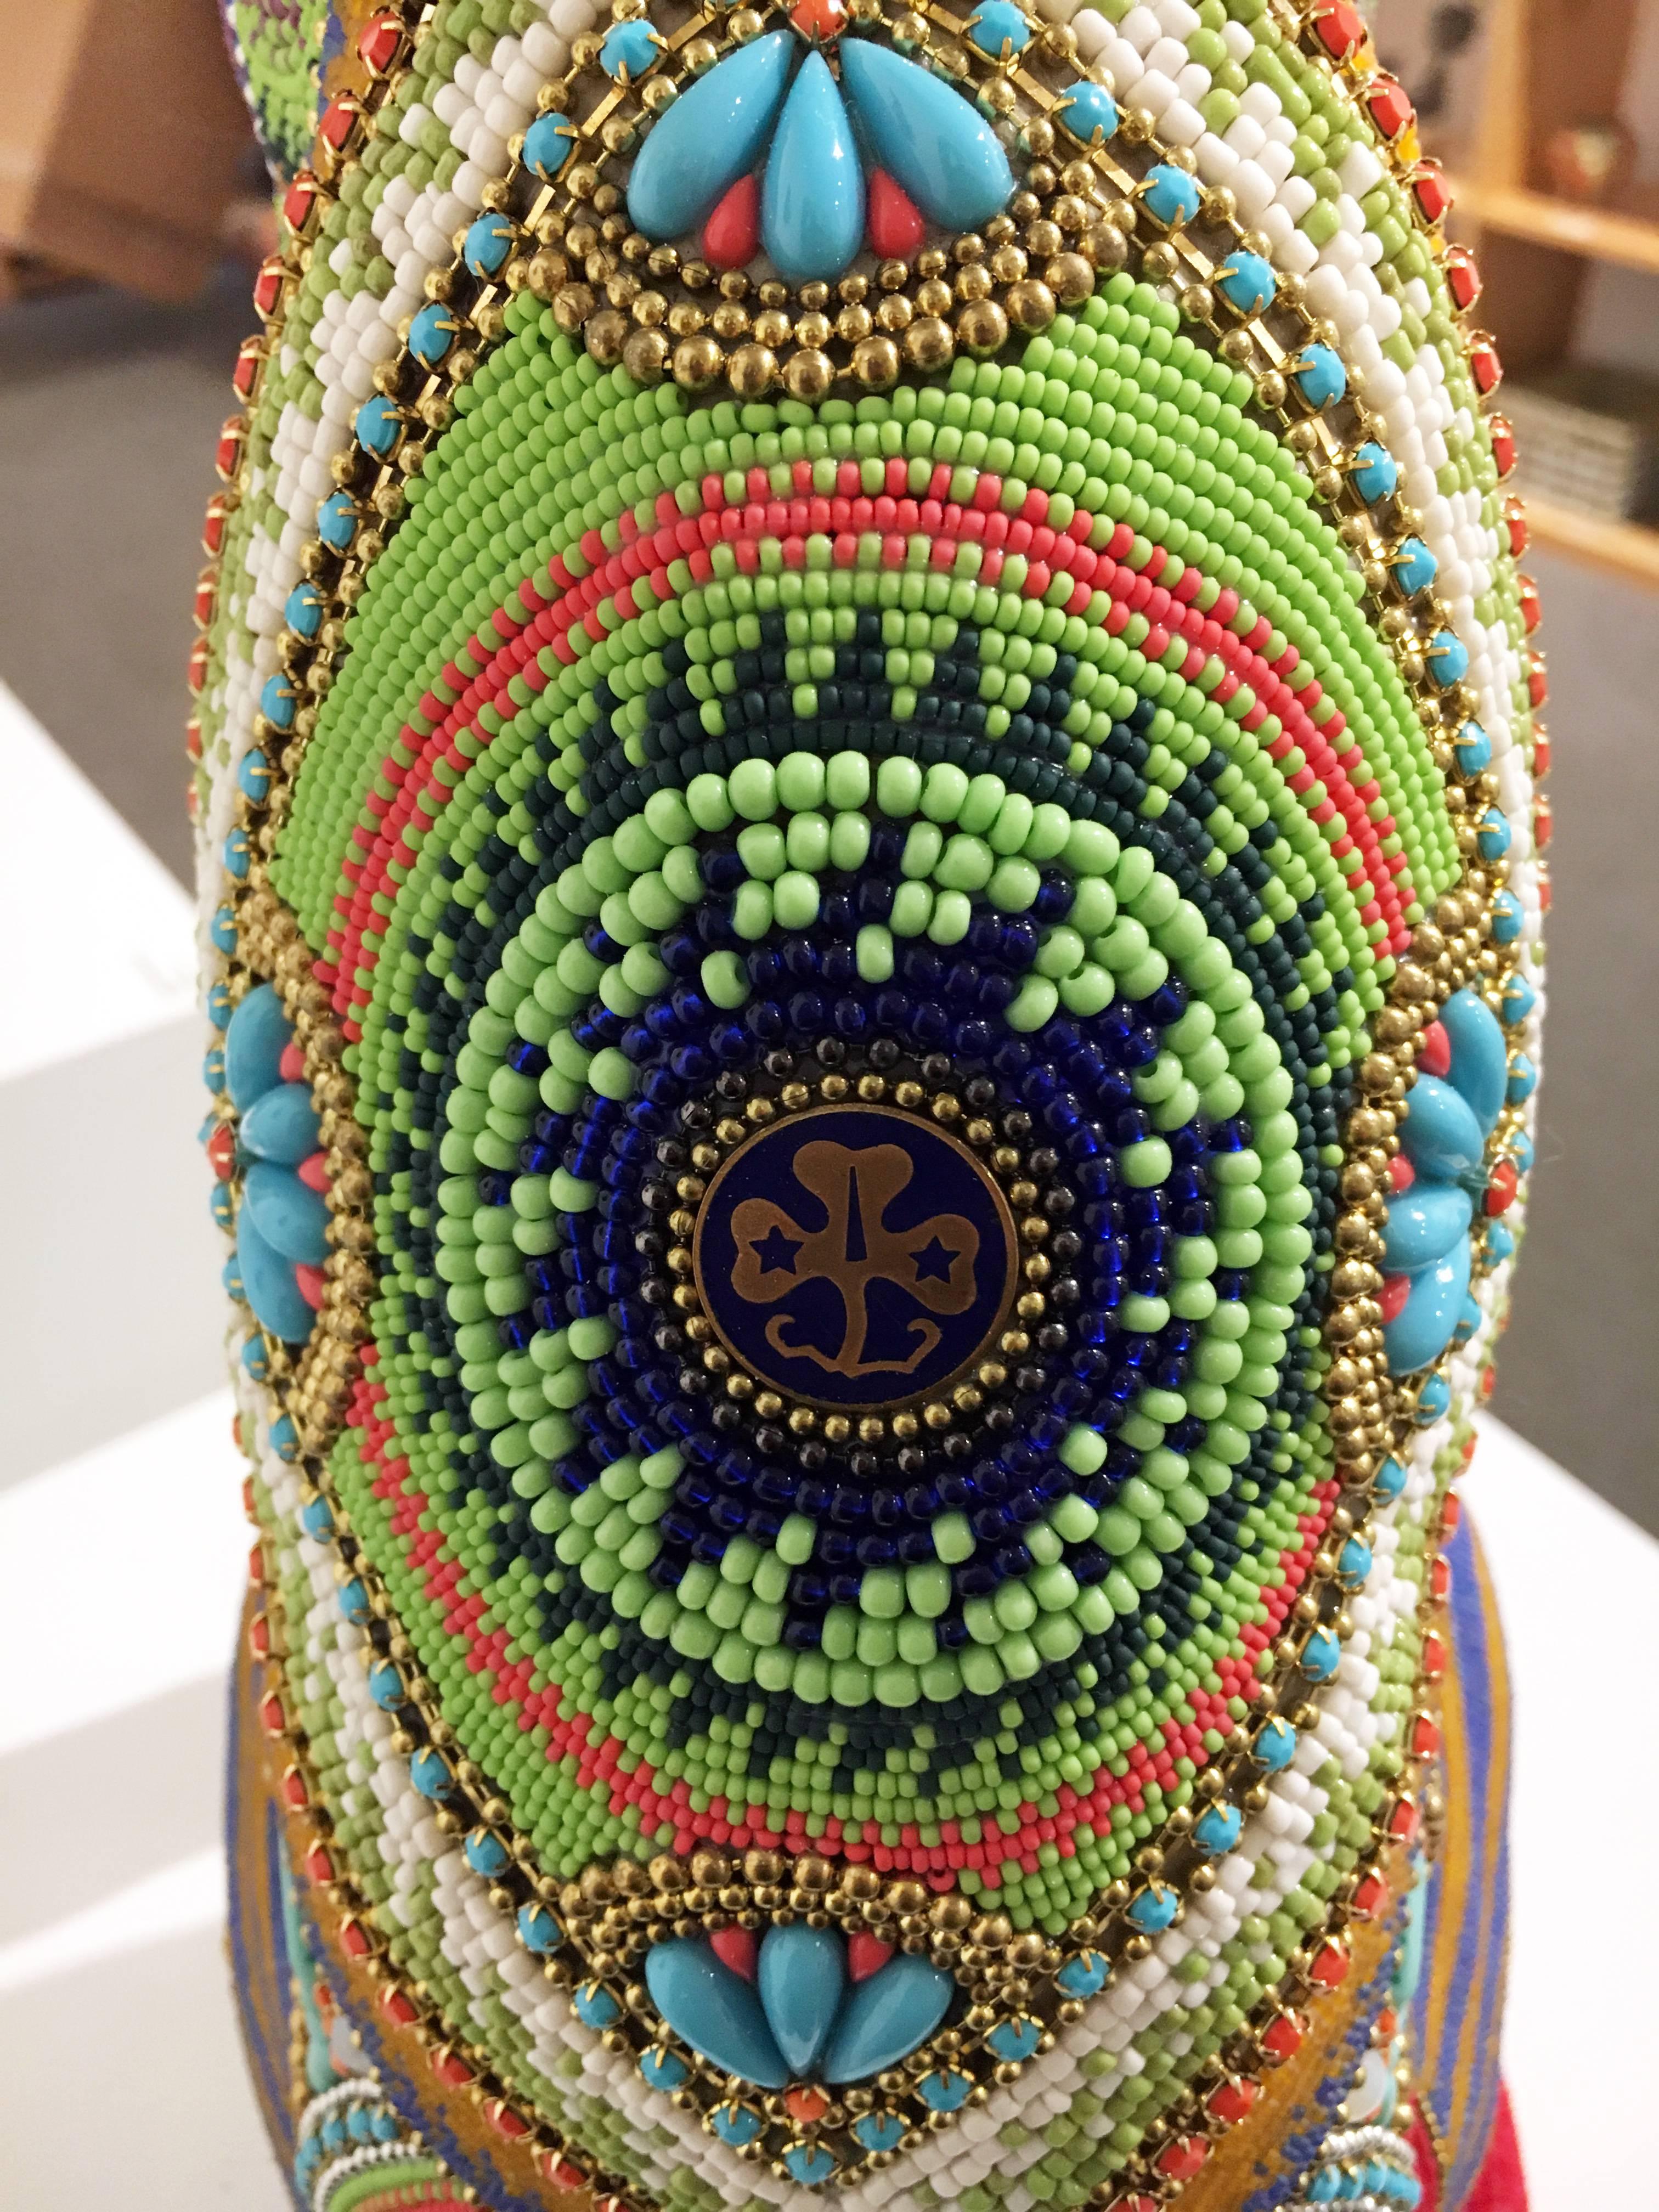 Anubis by Jan Huling, Brightly Colored Beaded Sculpture with Intricate Pattern 3